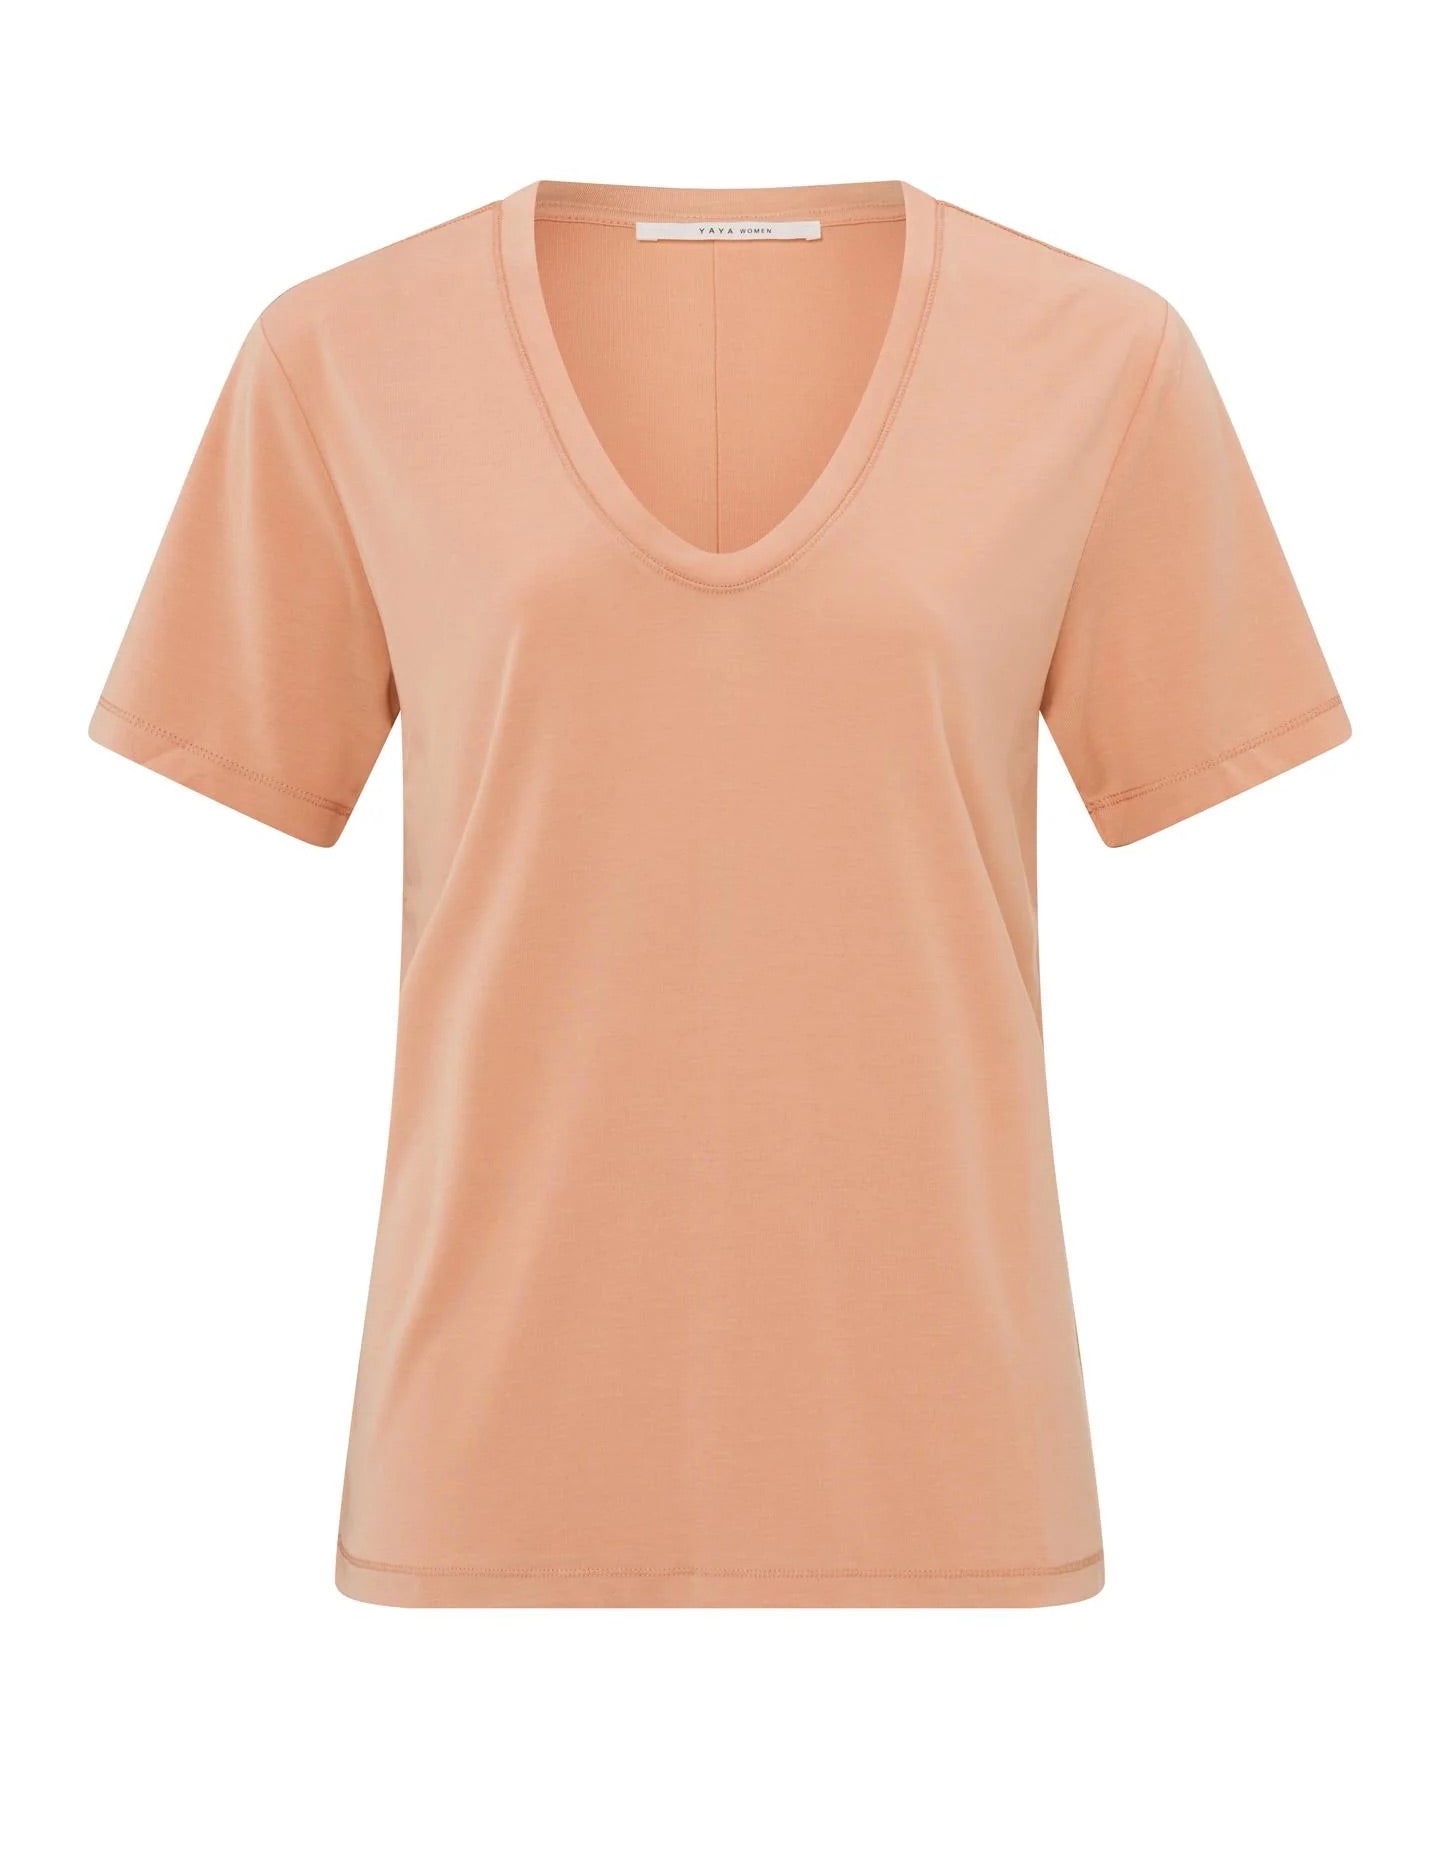 t-shirt-with-rounded-v-neck-and-short-sleeves-in-regular-fit-dusty-coral-orange_881a6ee2-8700-4d95-b33a-539d5955ac6c_2880x_jpg.jpg